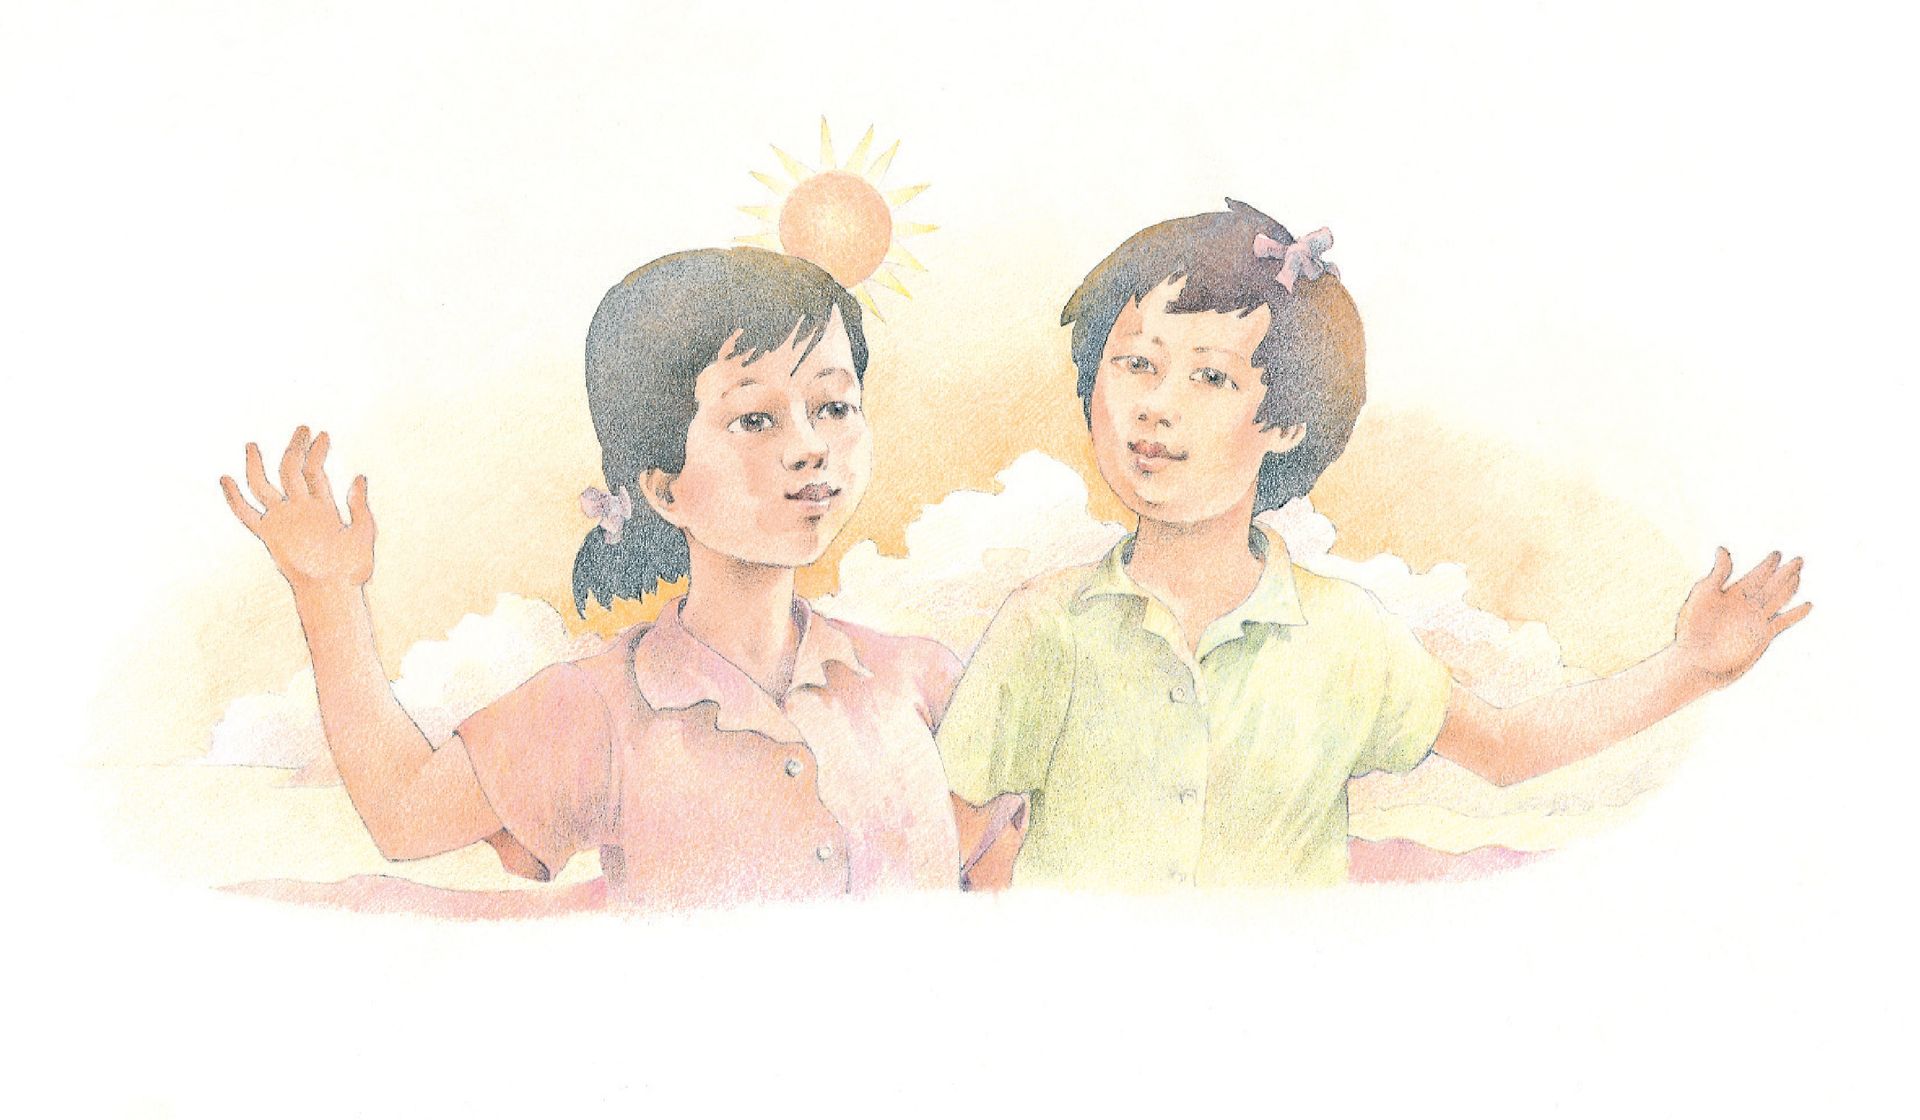 Two friends stand arm in arm in the sunlight. From the Children’s Songbook, page 261, “Here We Are Together”; watercolor illustration by Richard Hull.